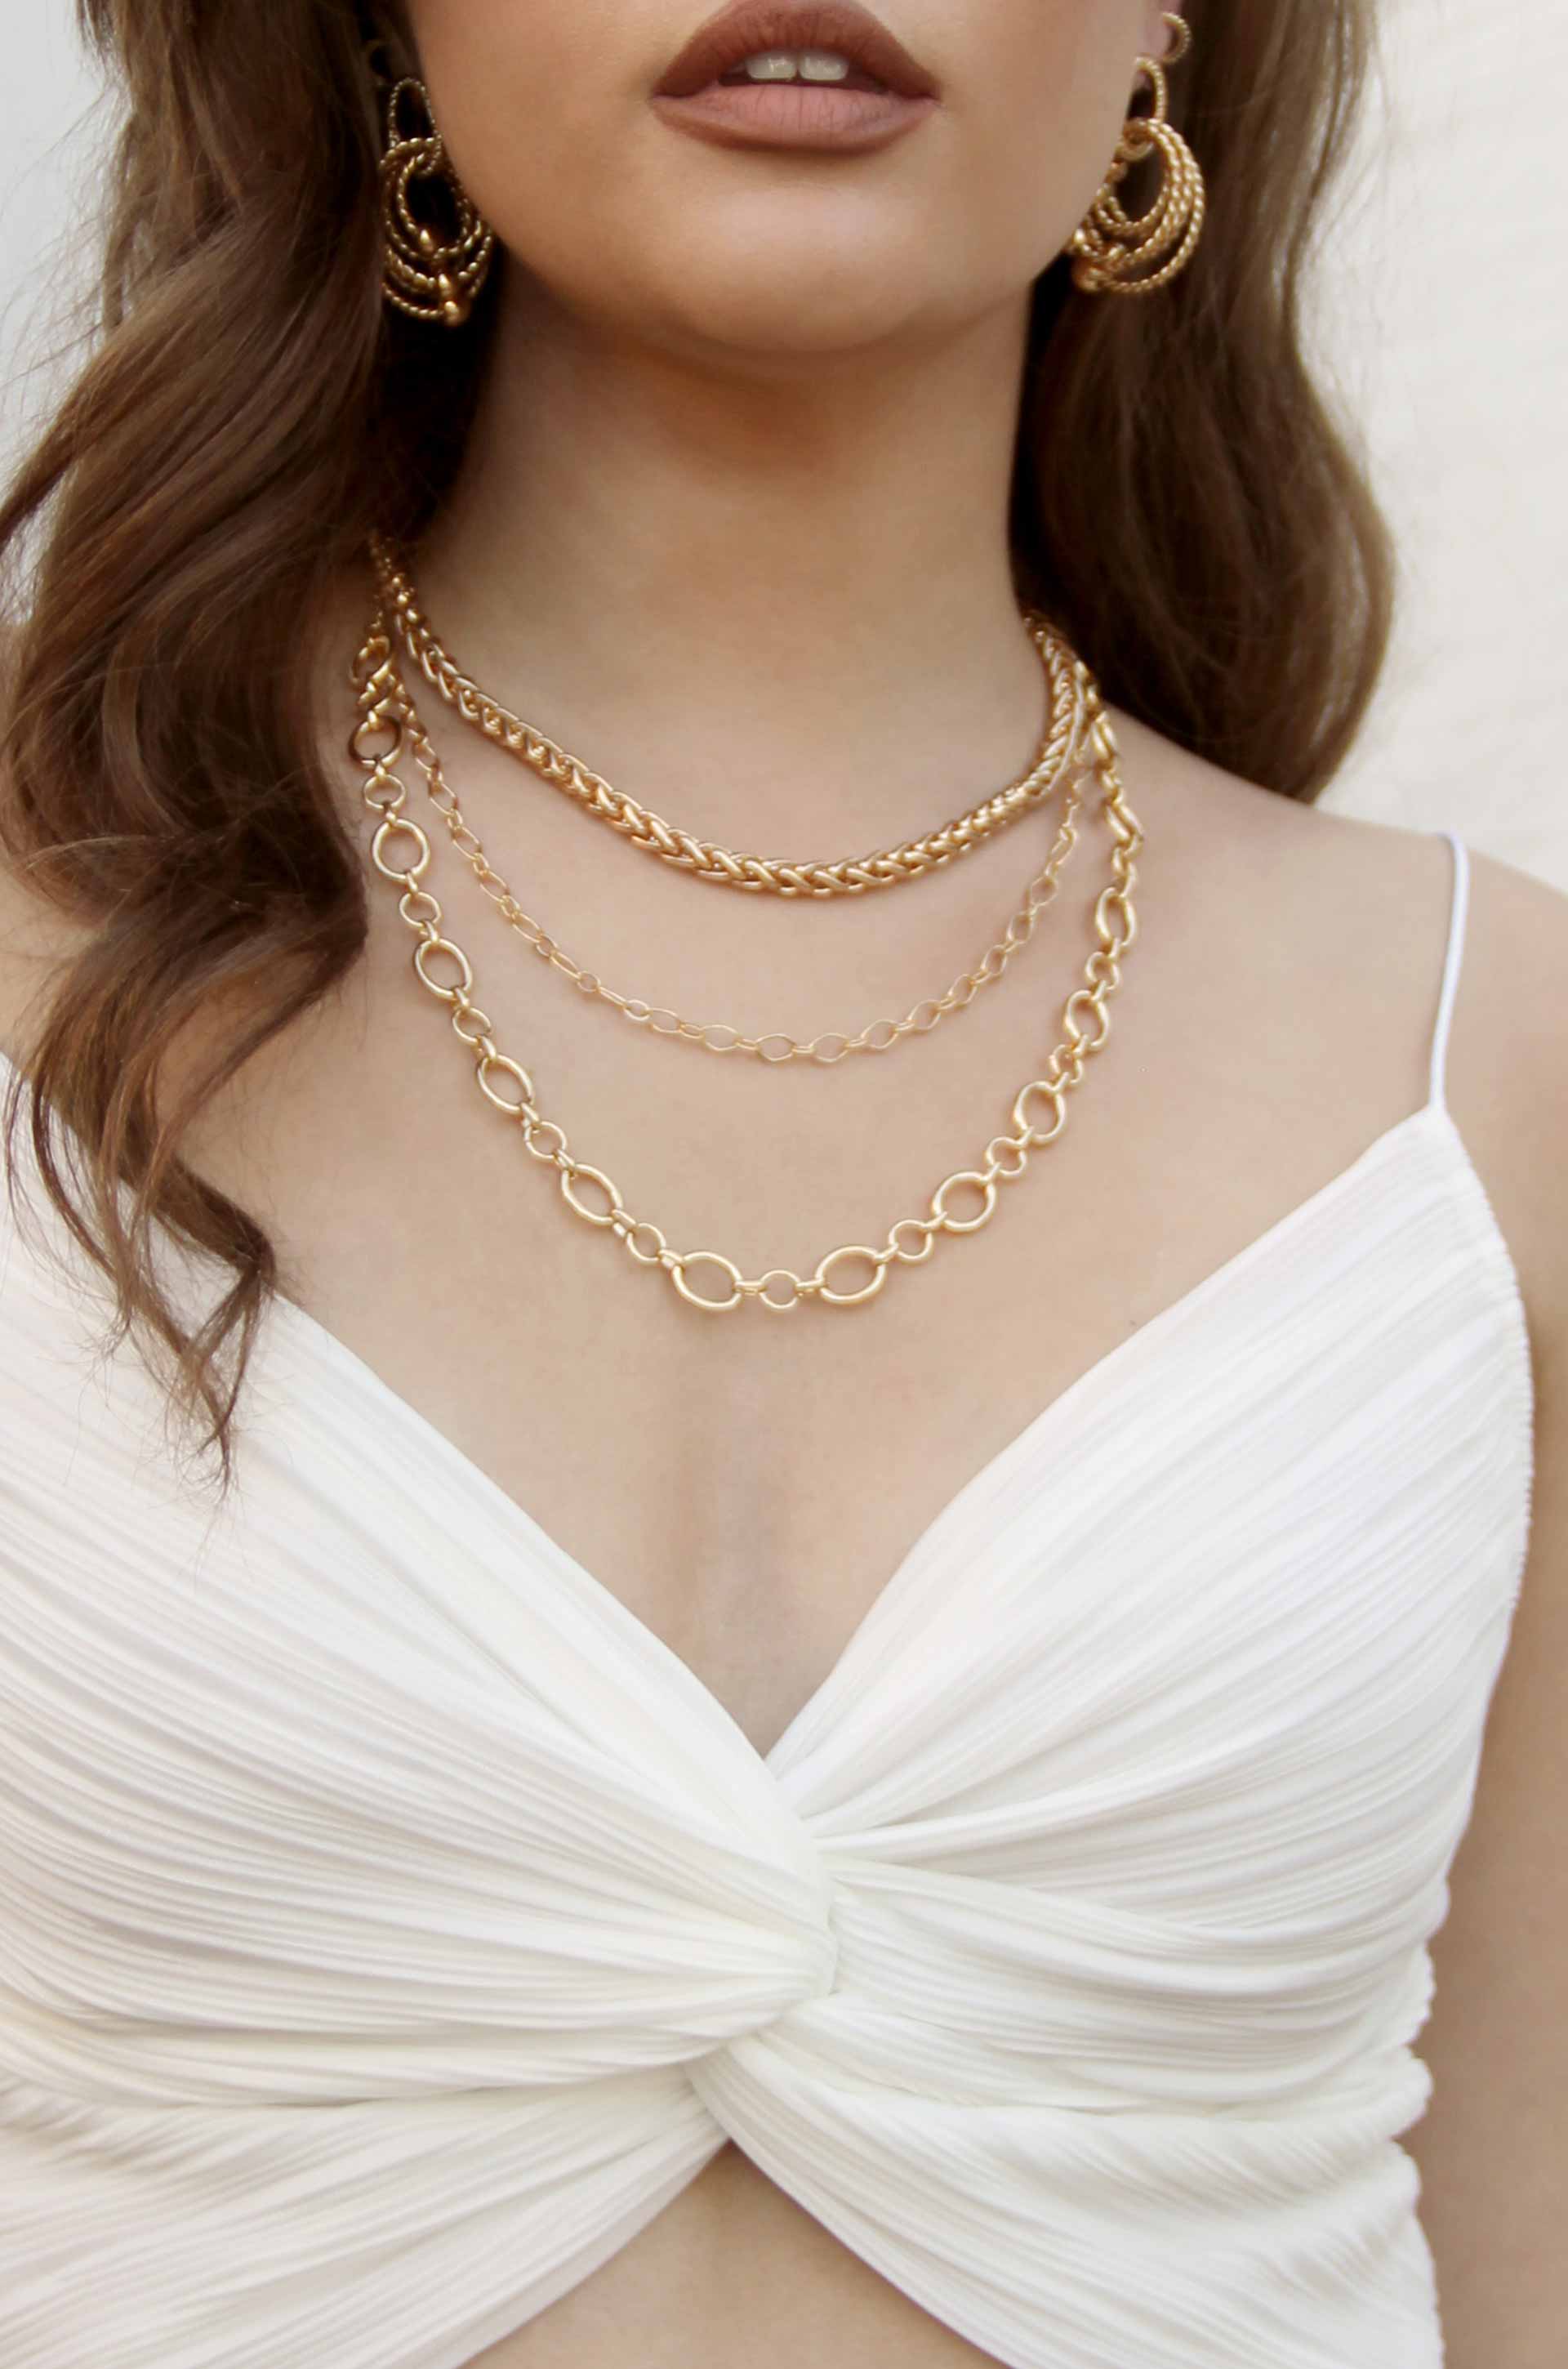 Large Links Double 18k Gold Plated Chain Necklace shown on a model  